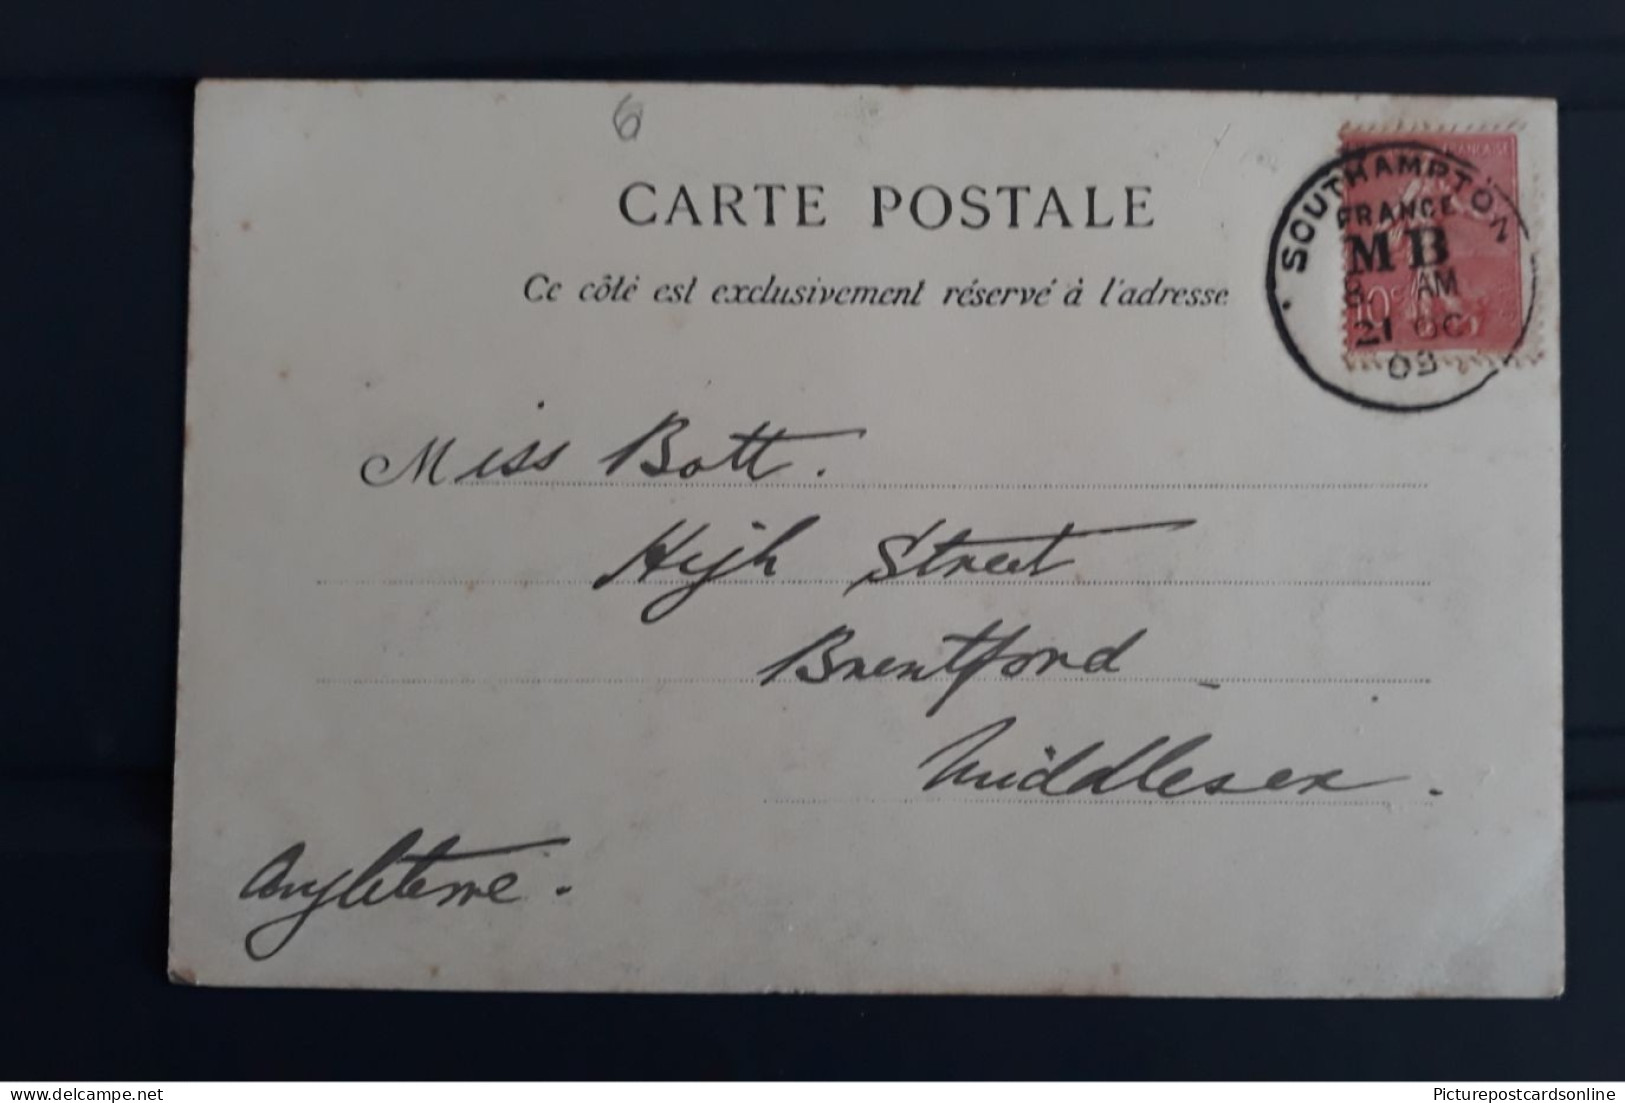 SOUTHAMPTON FRANCE MOVABLE BOX POSTMARK ON OLD FRENCH POSTCARD MB 21 OCT 1903 - Non Classés